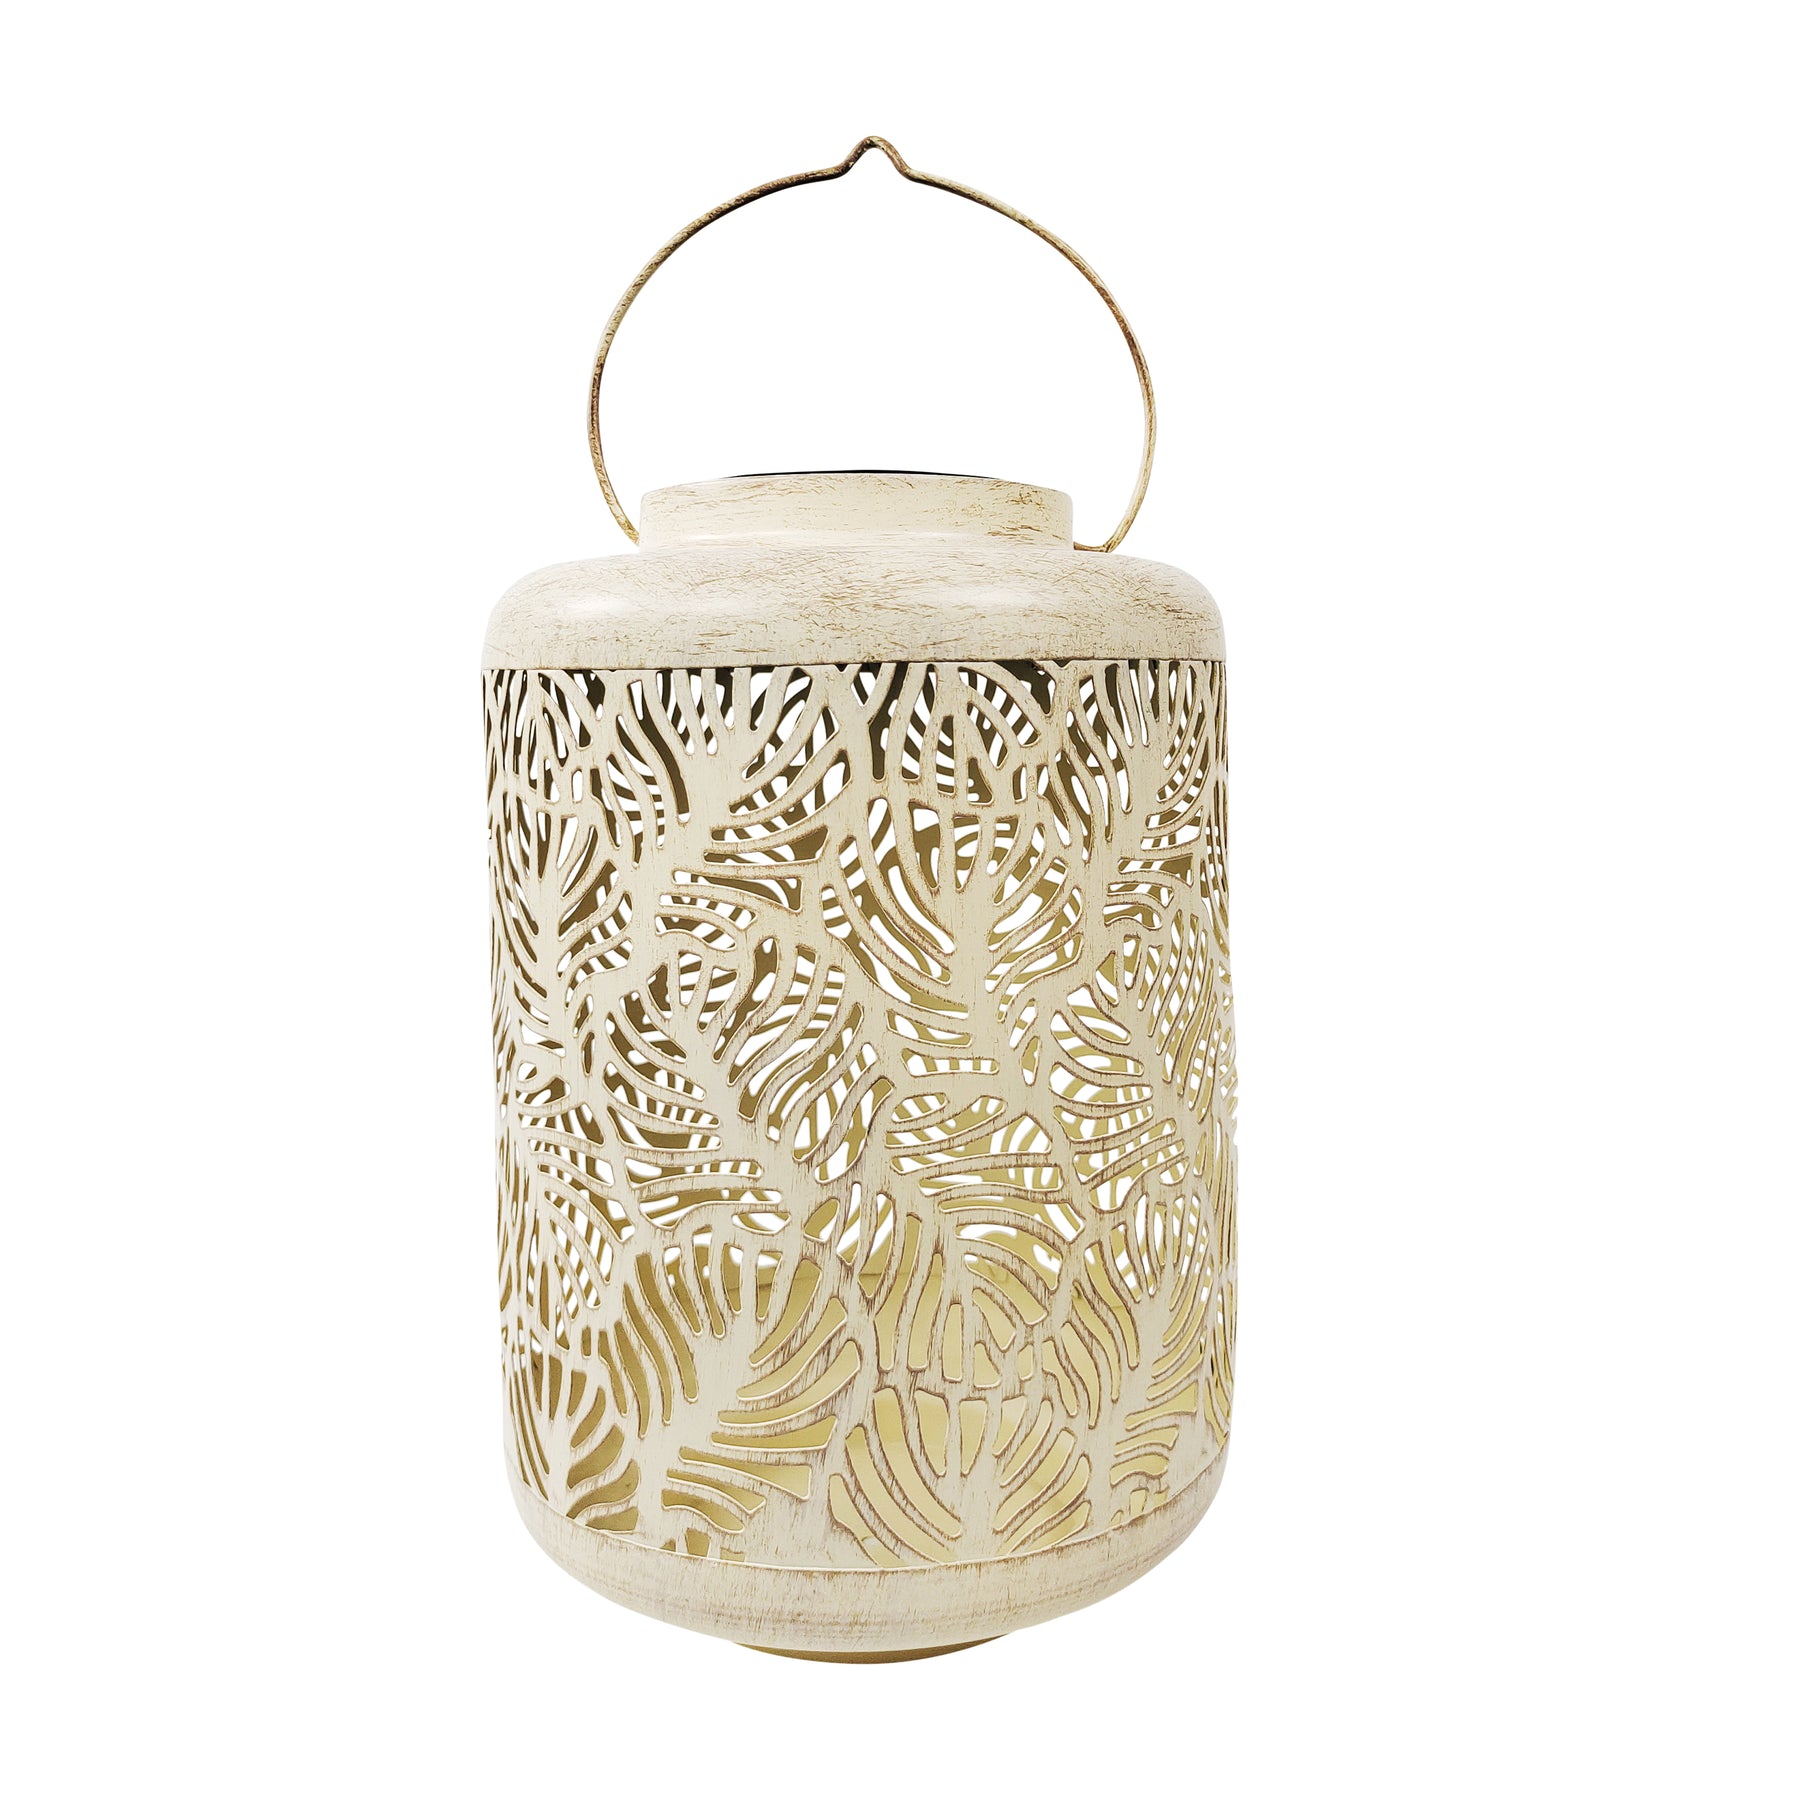 Bliss Outdoors 12-inch Tall Hanging and Tabletop Decorative Solar LED Lantern with Unique Tropical Leaf Design and Antique Hand Painted Finish in the antique white variation.